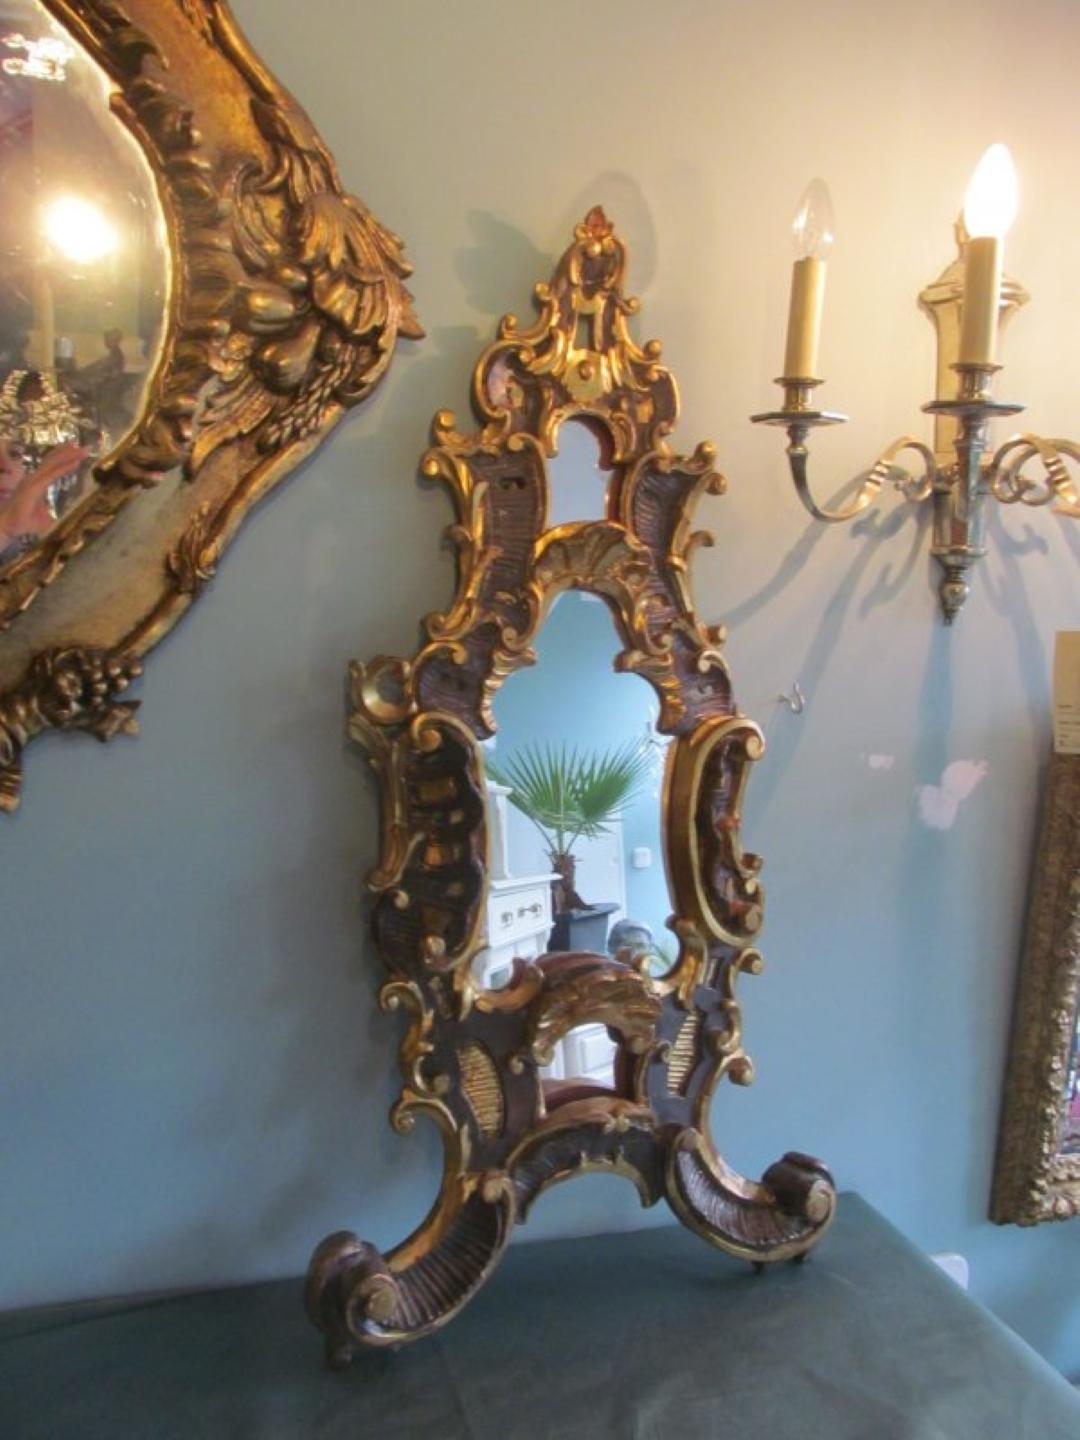 Antique Baroque table mirror from circa 1750. Made of basswood this single piece from a church in Germany convinces with its stunning carving works and the original gilding. The gilding has age related abrasions, but is in great original condition.